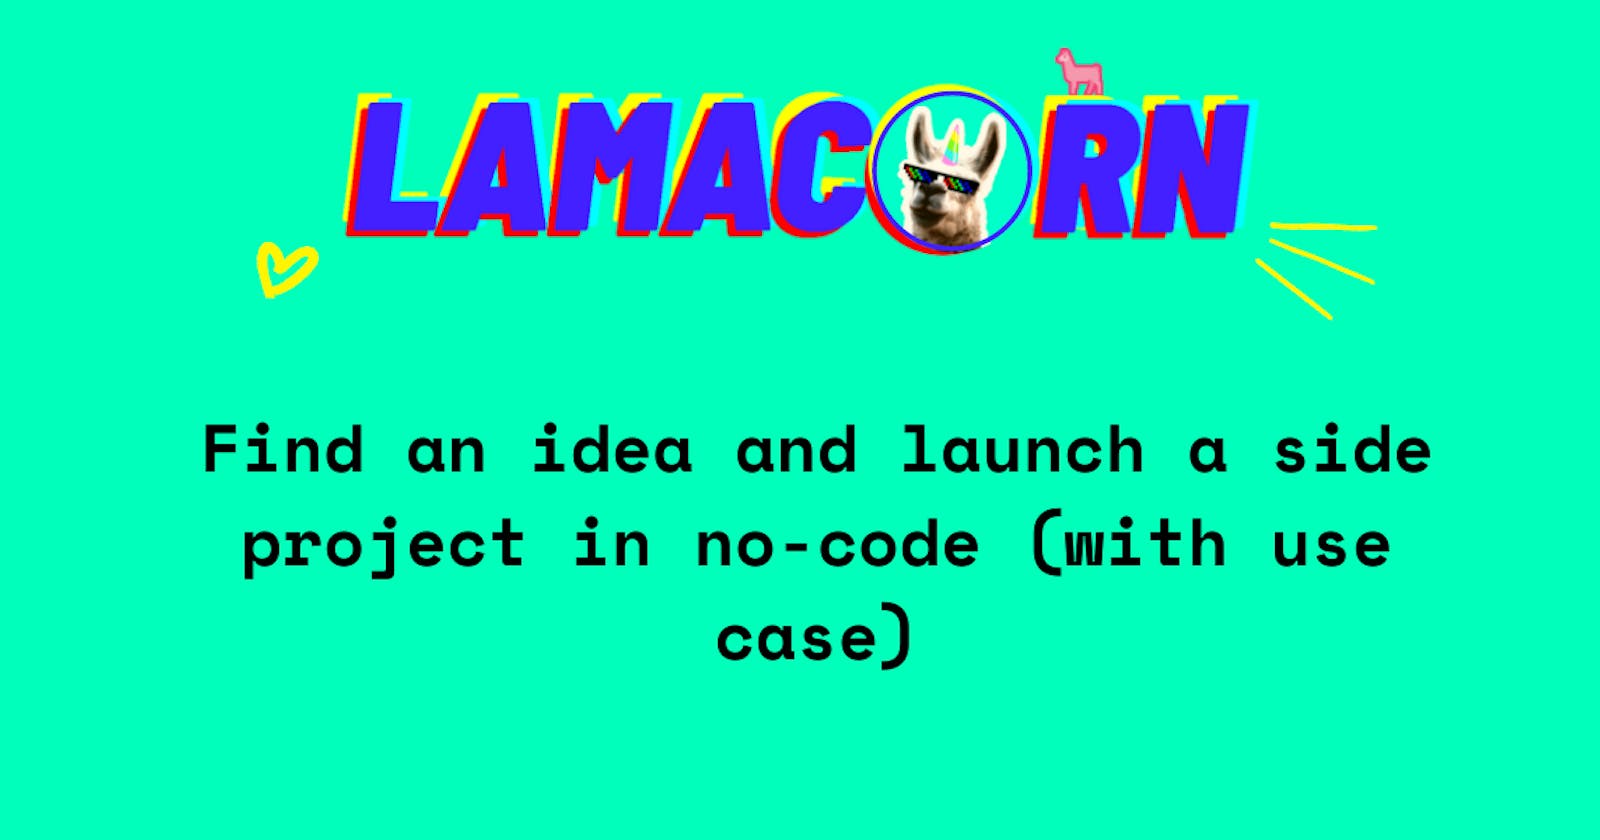 Use case to find an idea and launch a side project in no-code